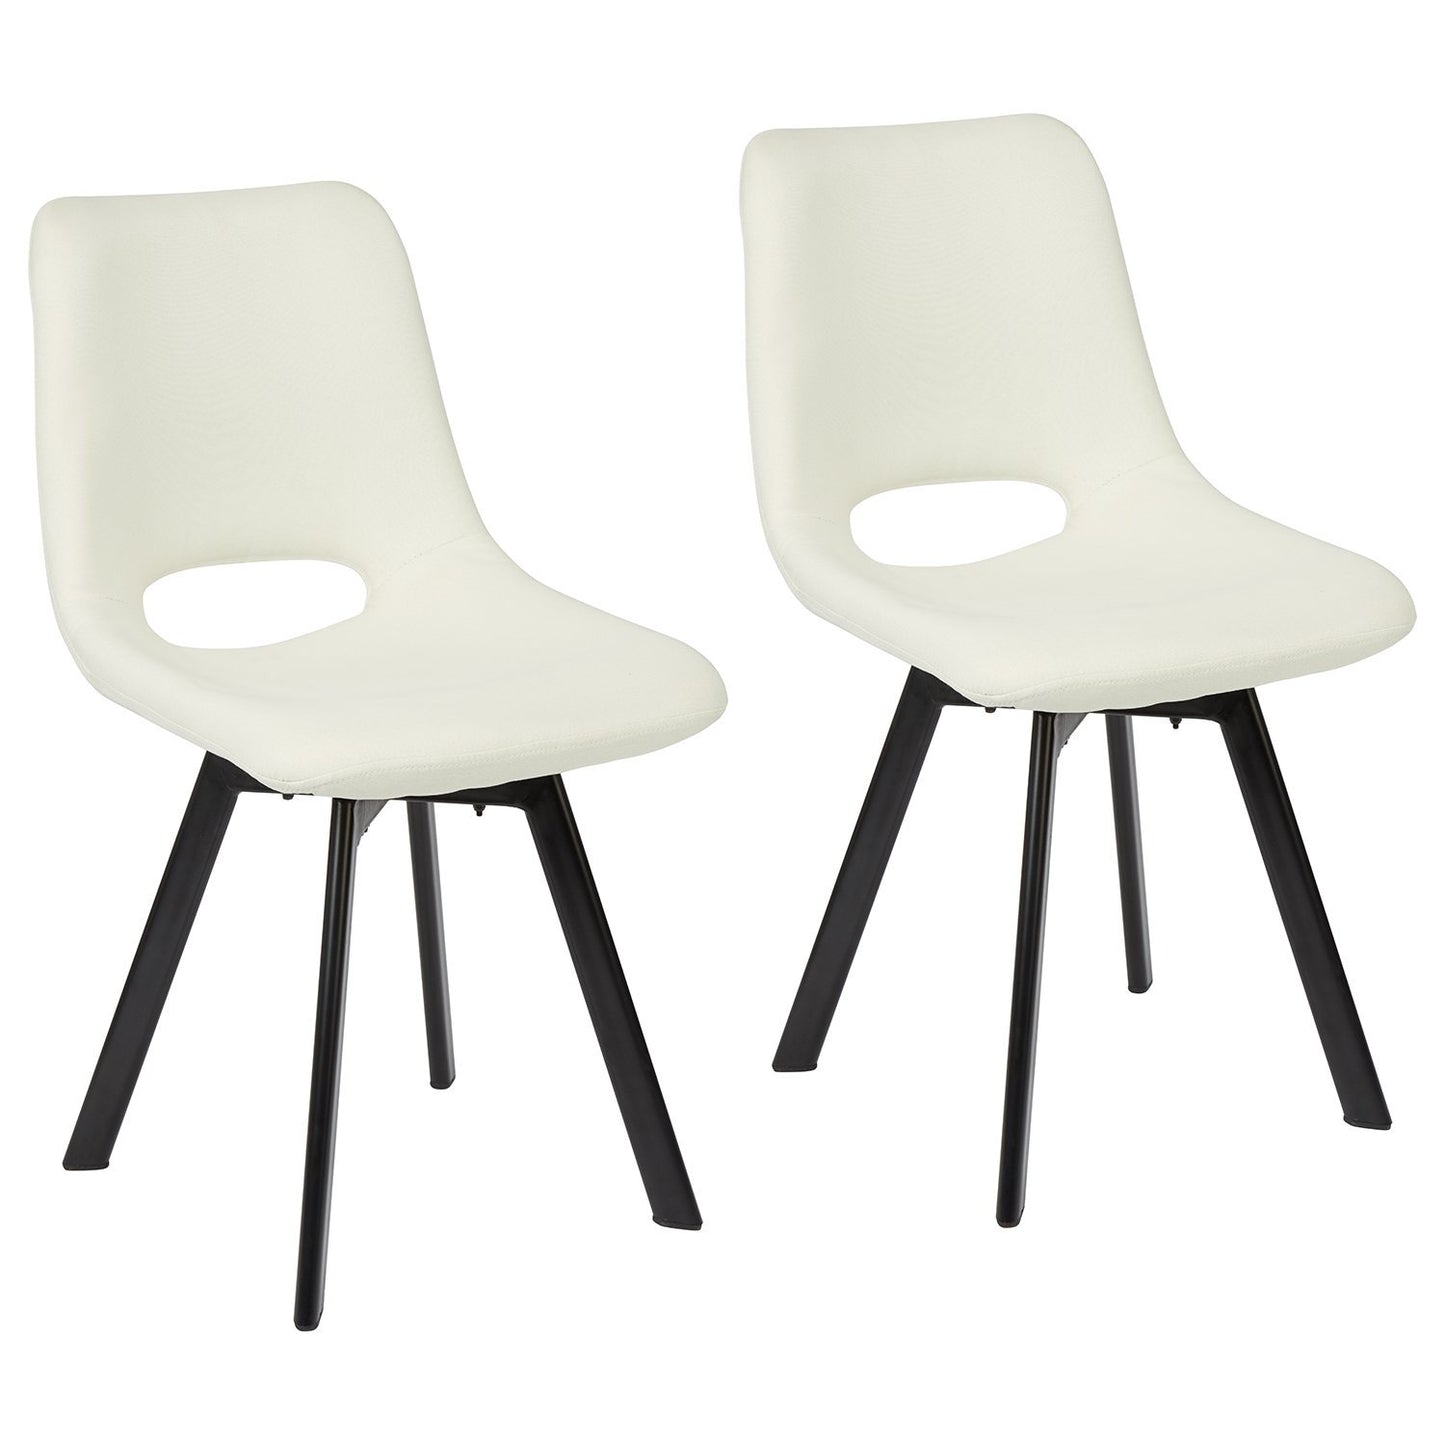 Margot dining chairs x2 - cream and black - Laura James